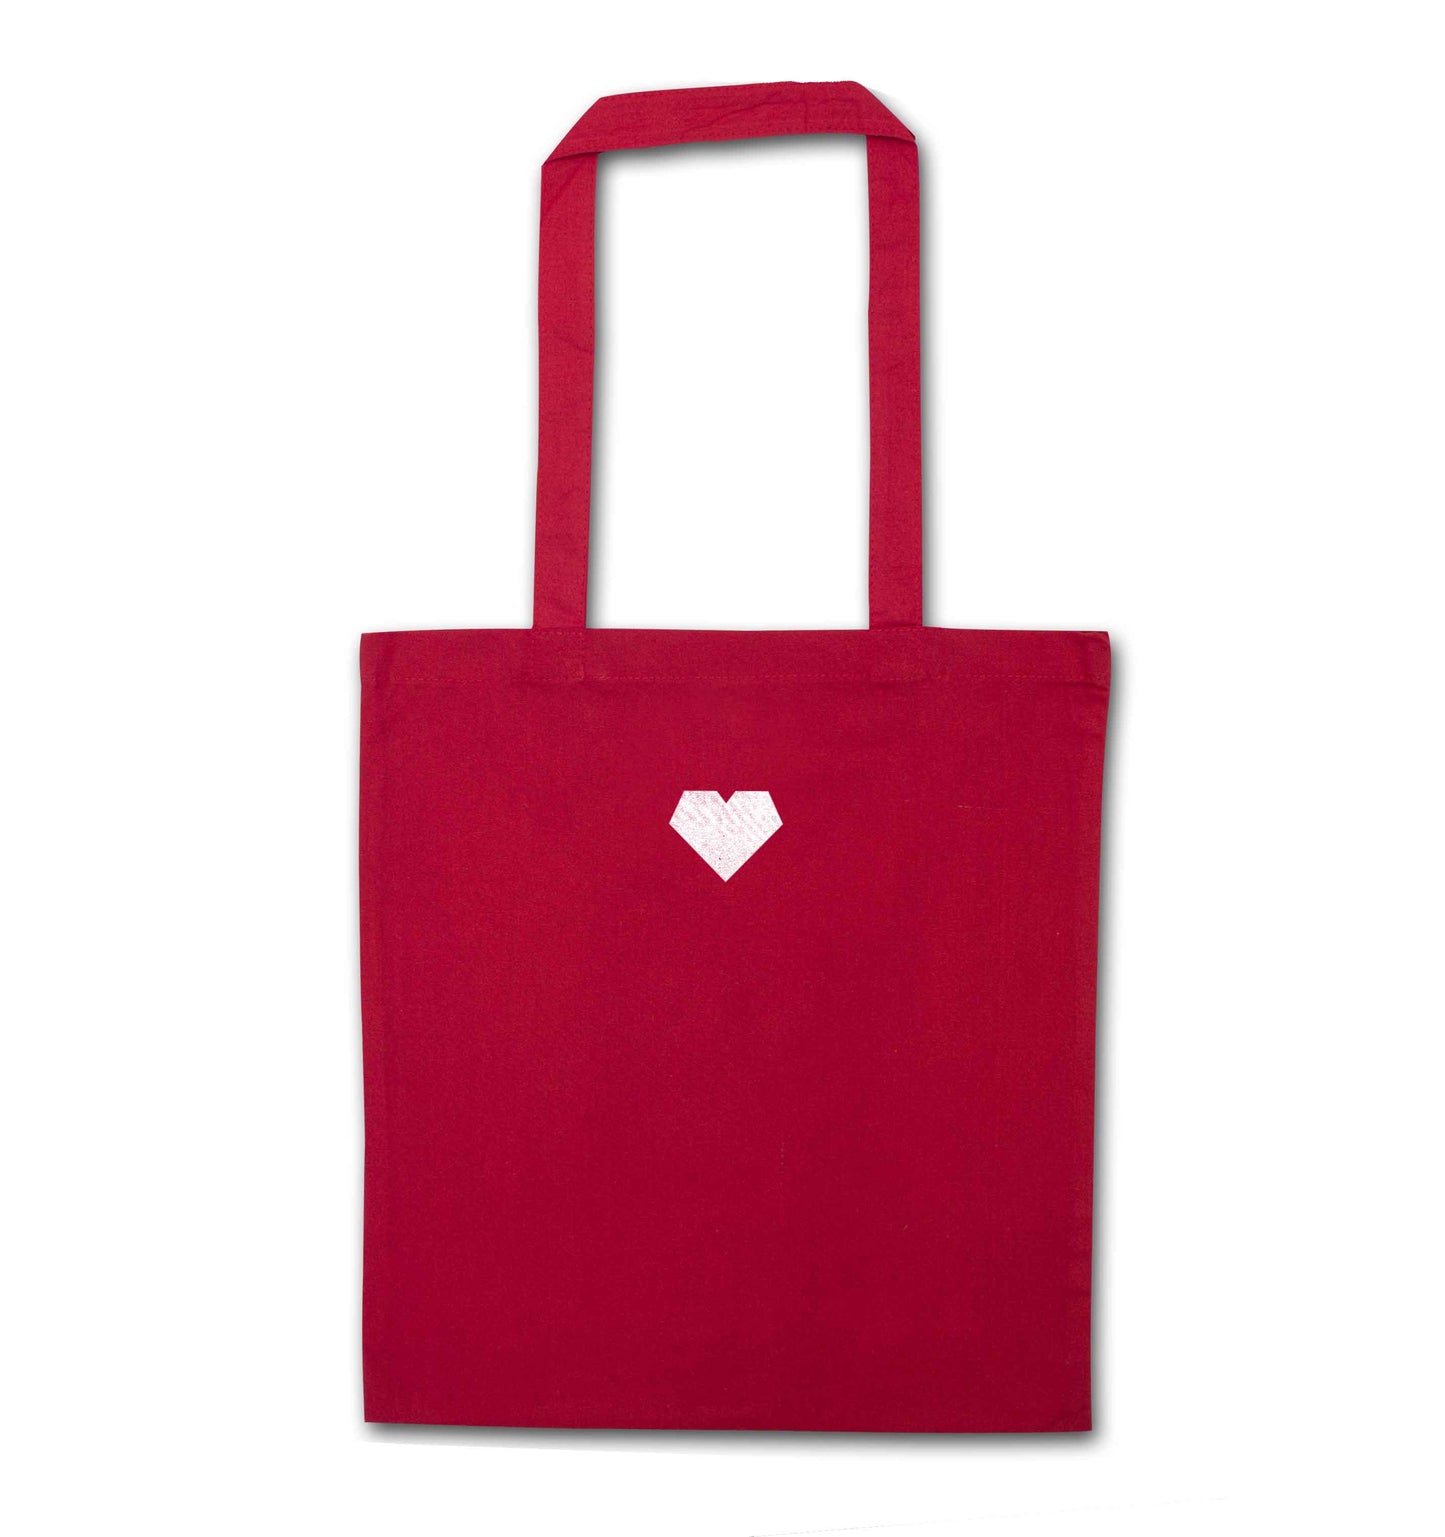 Tiny heart red tote bag